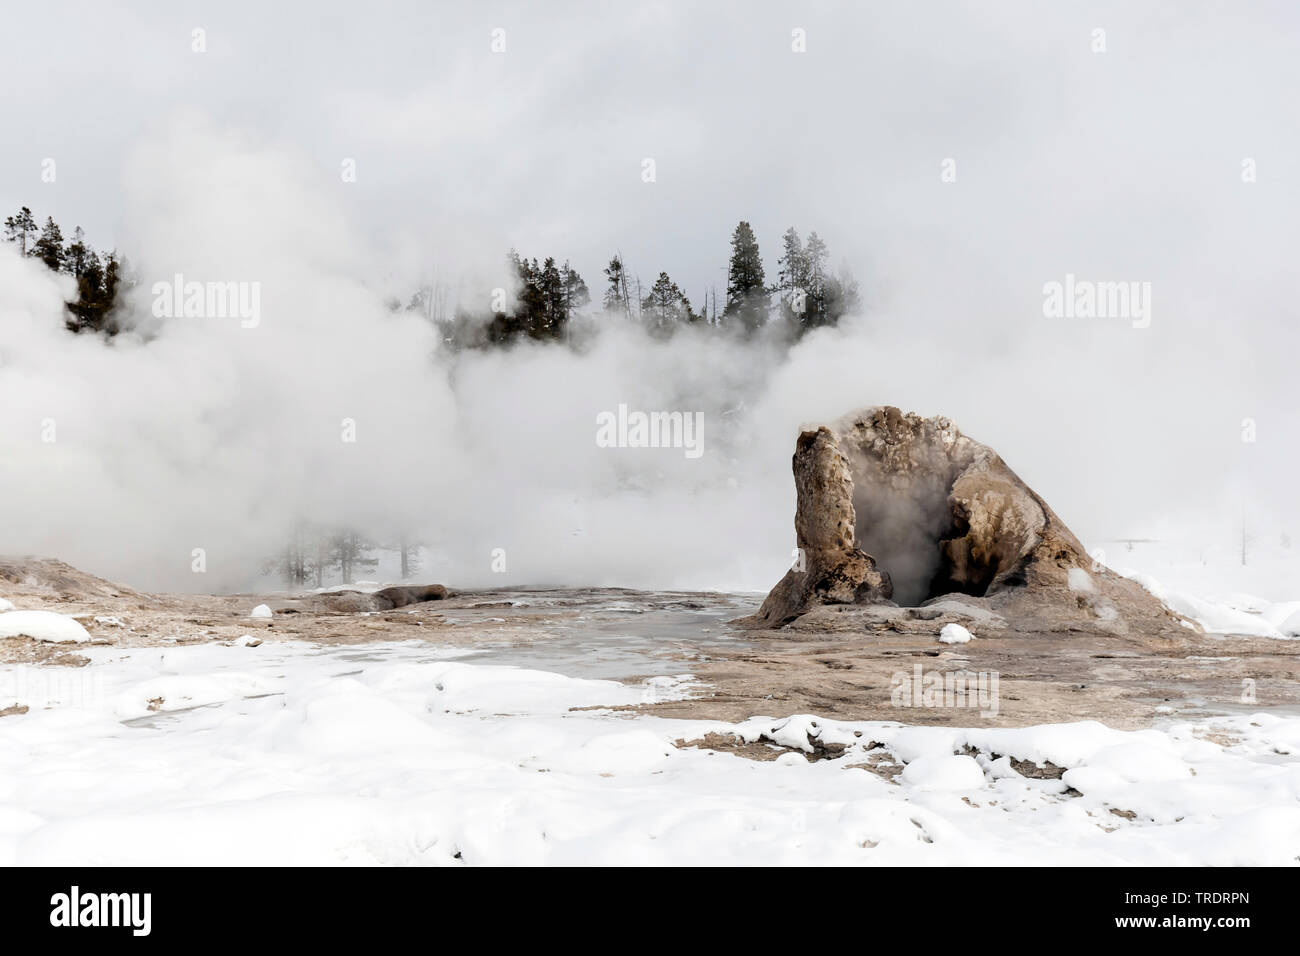 Old Faithful Geyser dans la neige, USA, Wyoming, Yellowstone National Park Banque D'Images